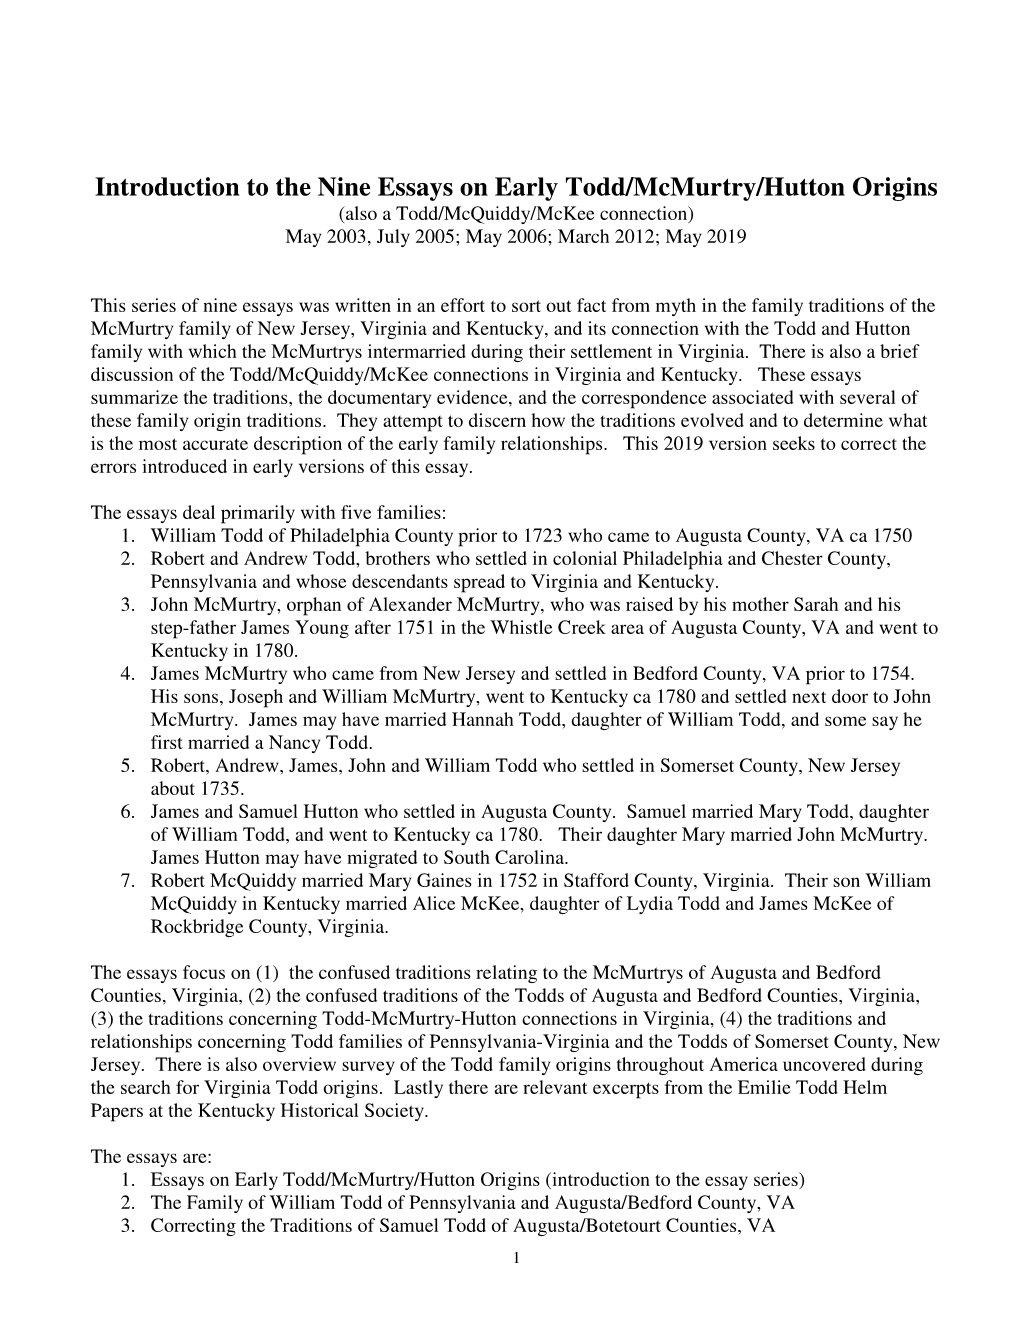 Introduction to the Nine Essays on Early Todd/Mcmurtry/Hutton Origins (Also a Todd/Mcquiddy/Mckee Connection) May 2003, July 2005; May 2006; March 2012; May 2019